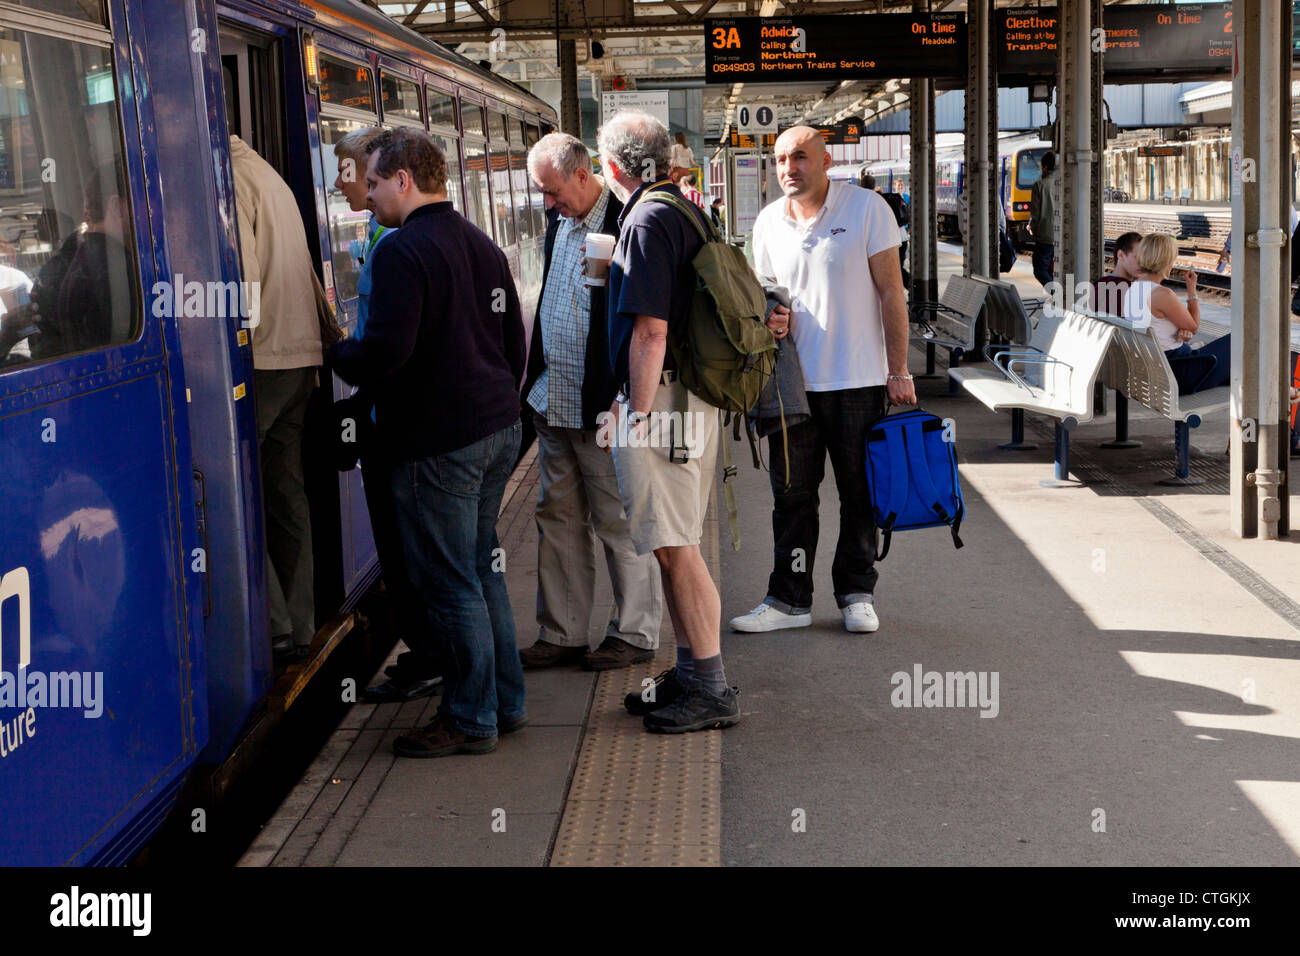 A group of men boarding a train at Sheffield Railway Station, Sheffield, Yorkshire, England, UK Stock Photo